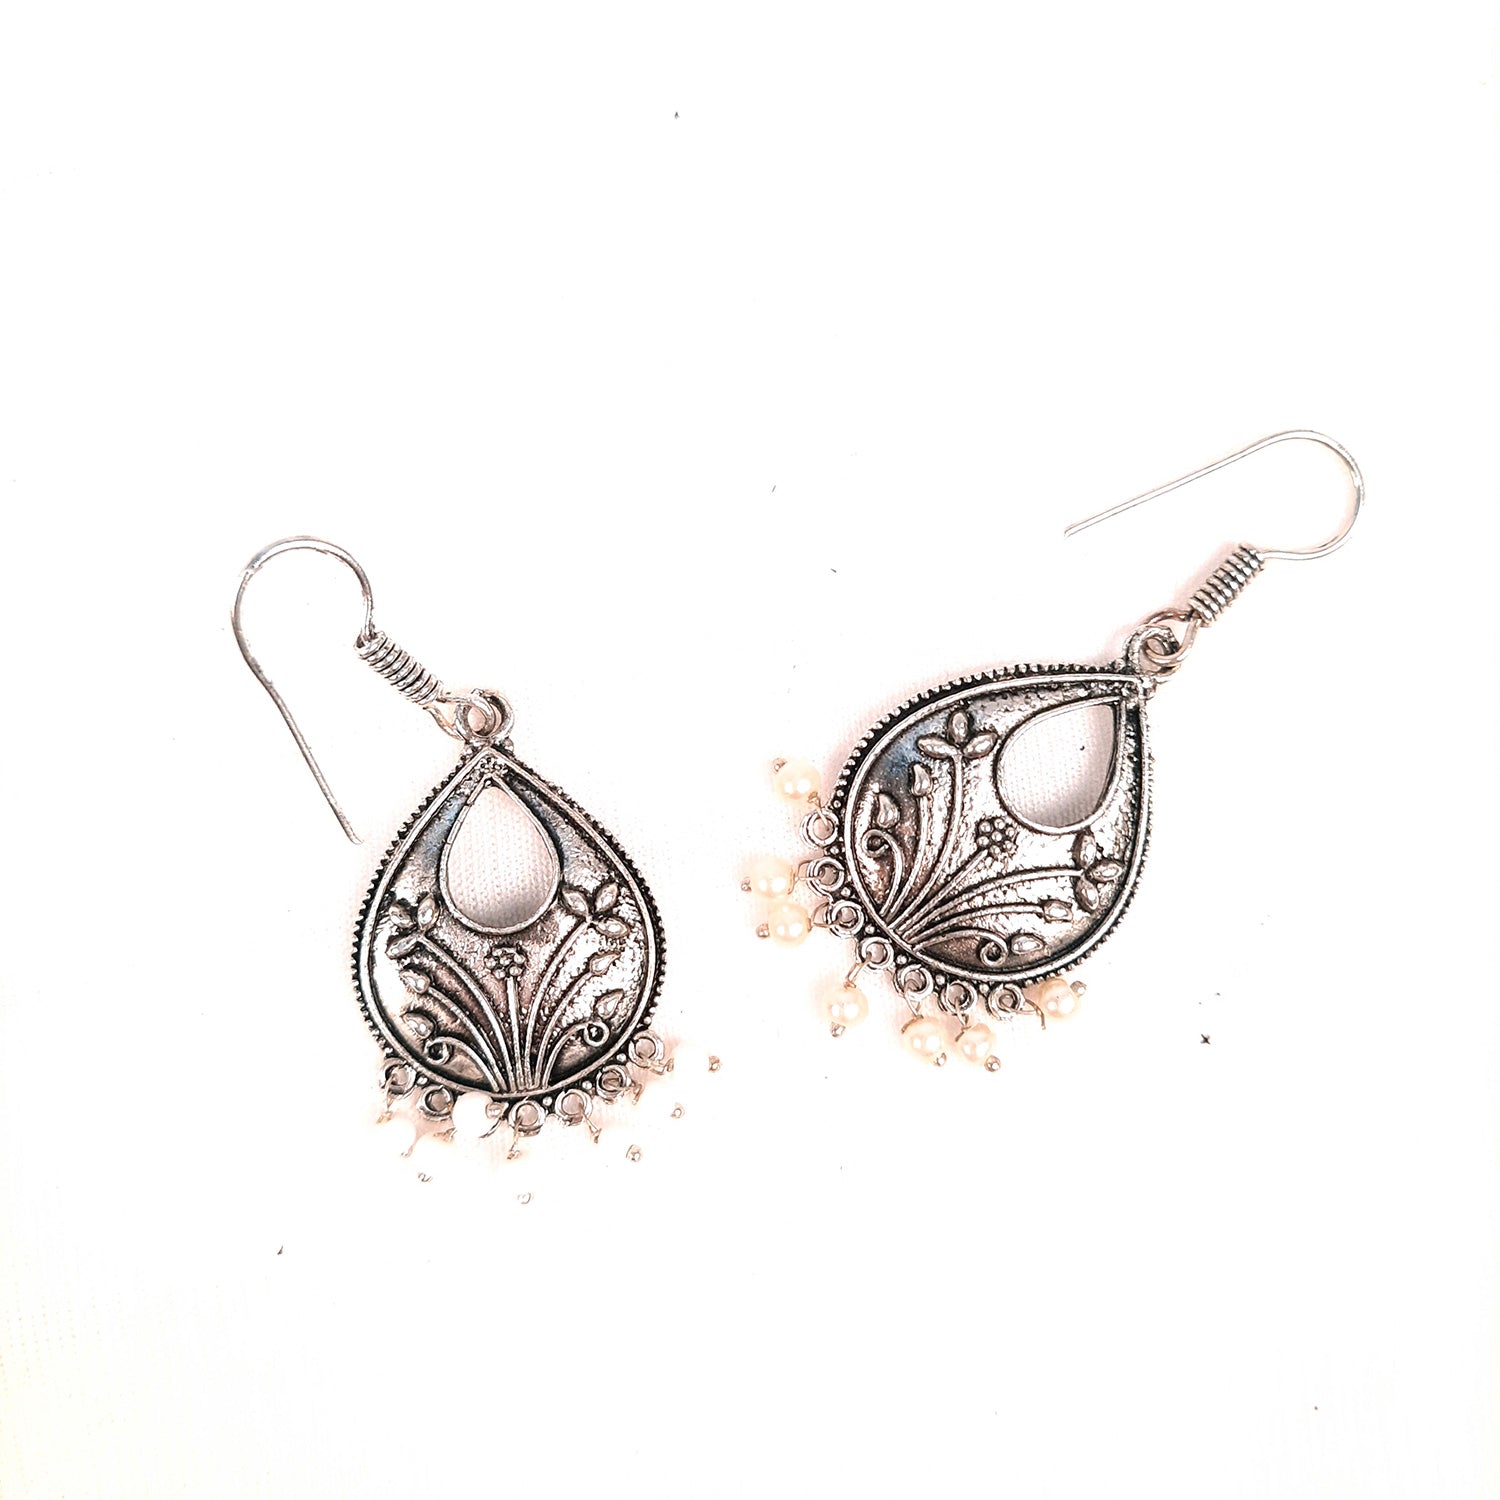 Oxidised Dangler Earrings for Girls and Women | Latest Stylish Fashion Jewellery | Gifts for Her, Friendship Day, Valentine's Day Gift - Apkamart